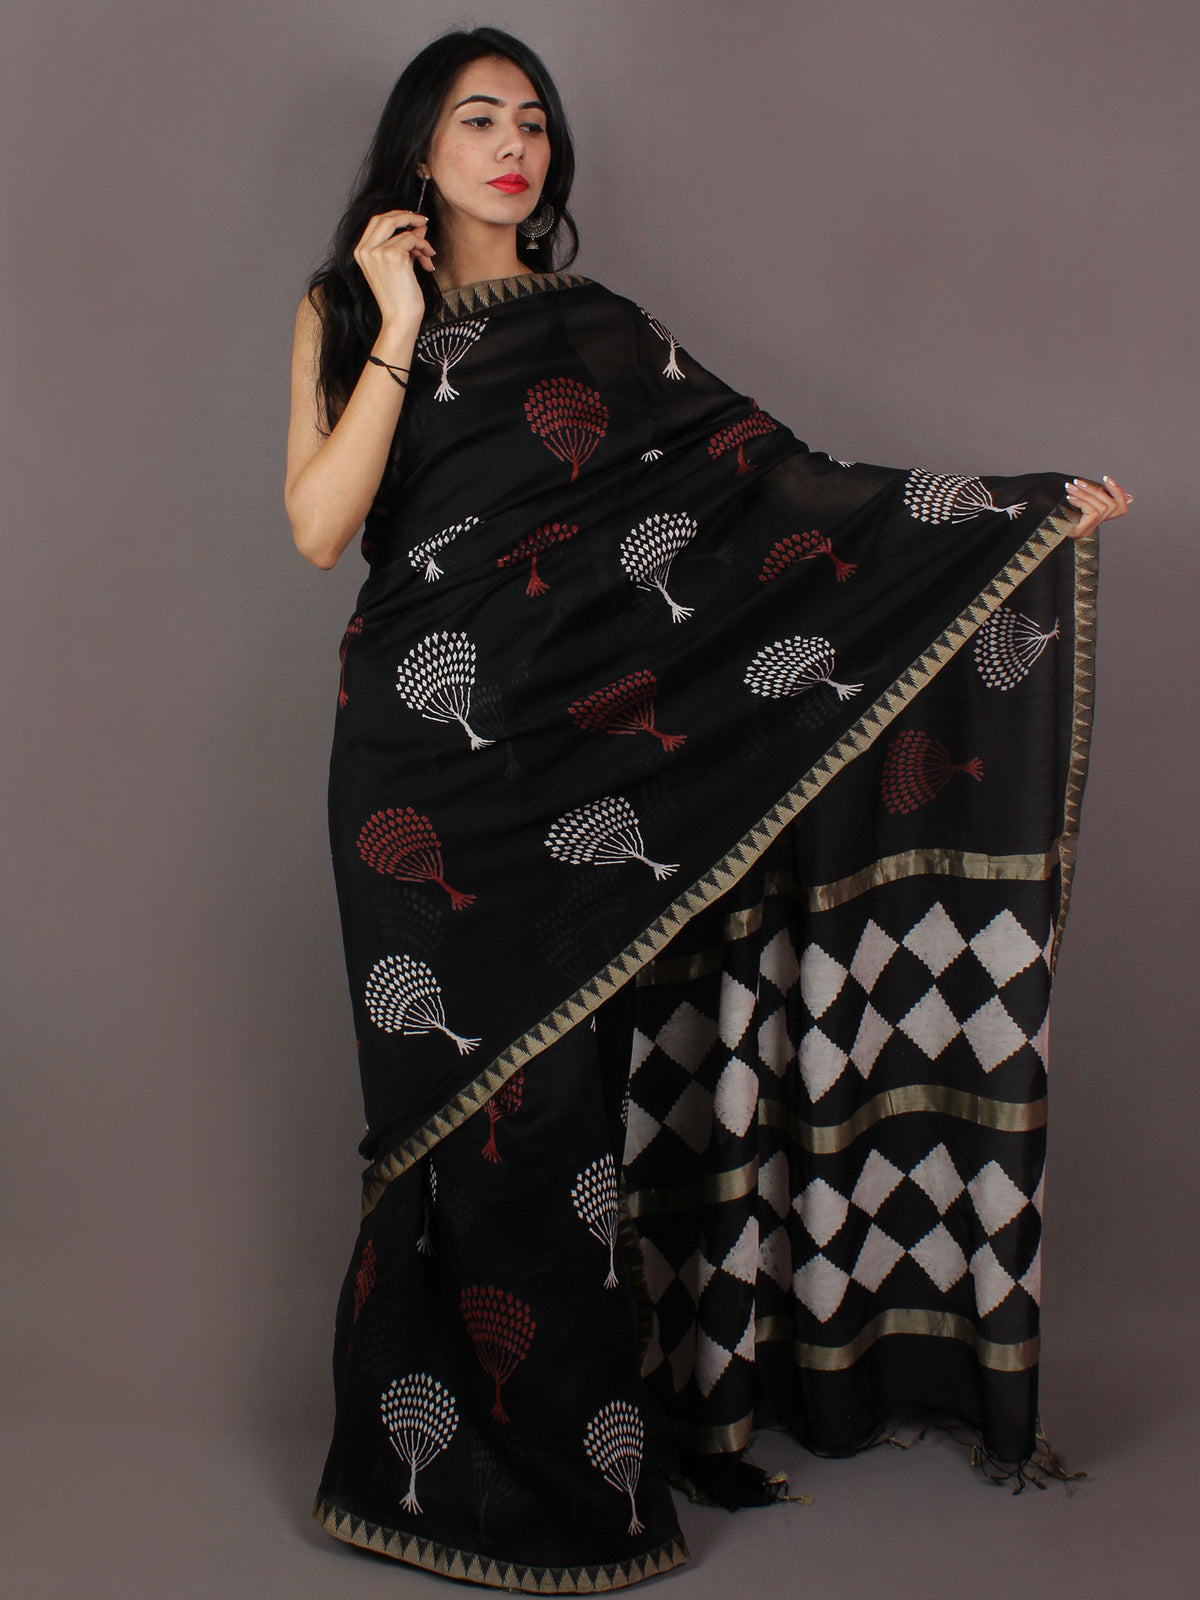 Black Red White Hand Block Printed in Natural Colors Chanderi Saree With Geecha Border - S031701014